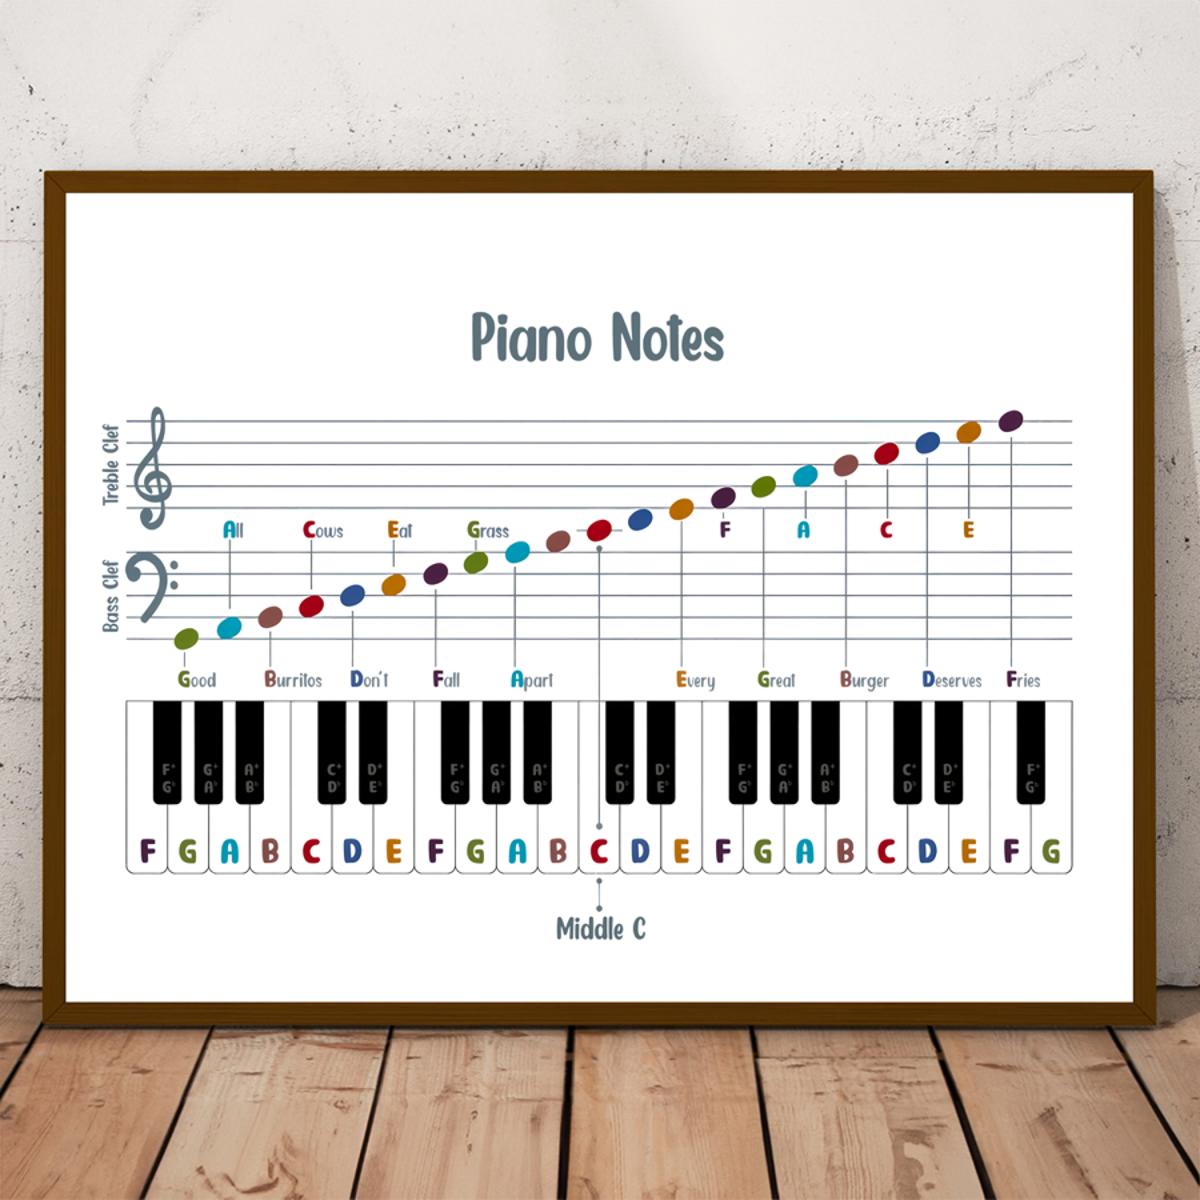 Piano Music Notes Poster, Piano Keyboard Notes Chart on Staff, Music  Education, Music Note Value, Music Classroom Decor, Digital Download 